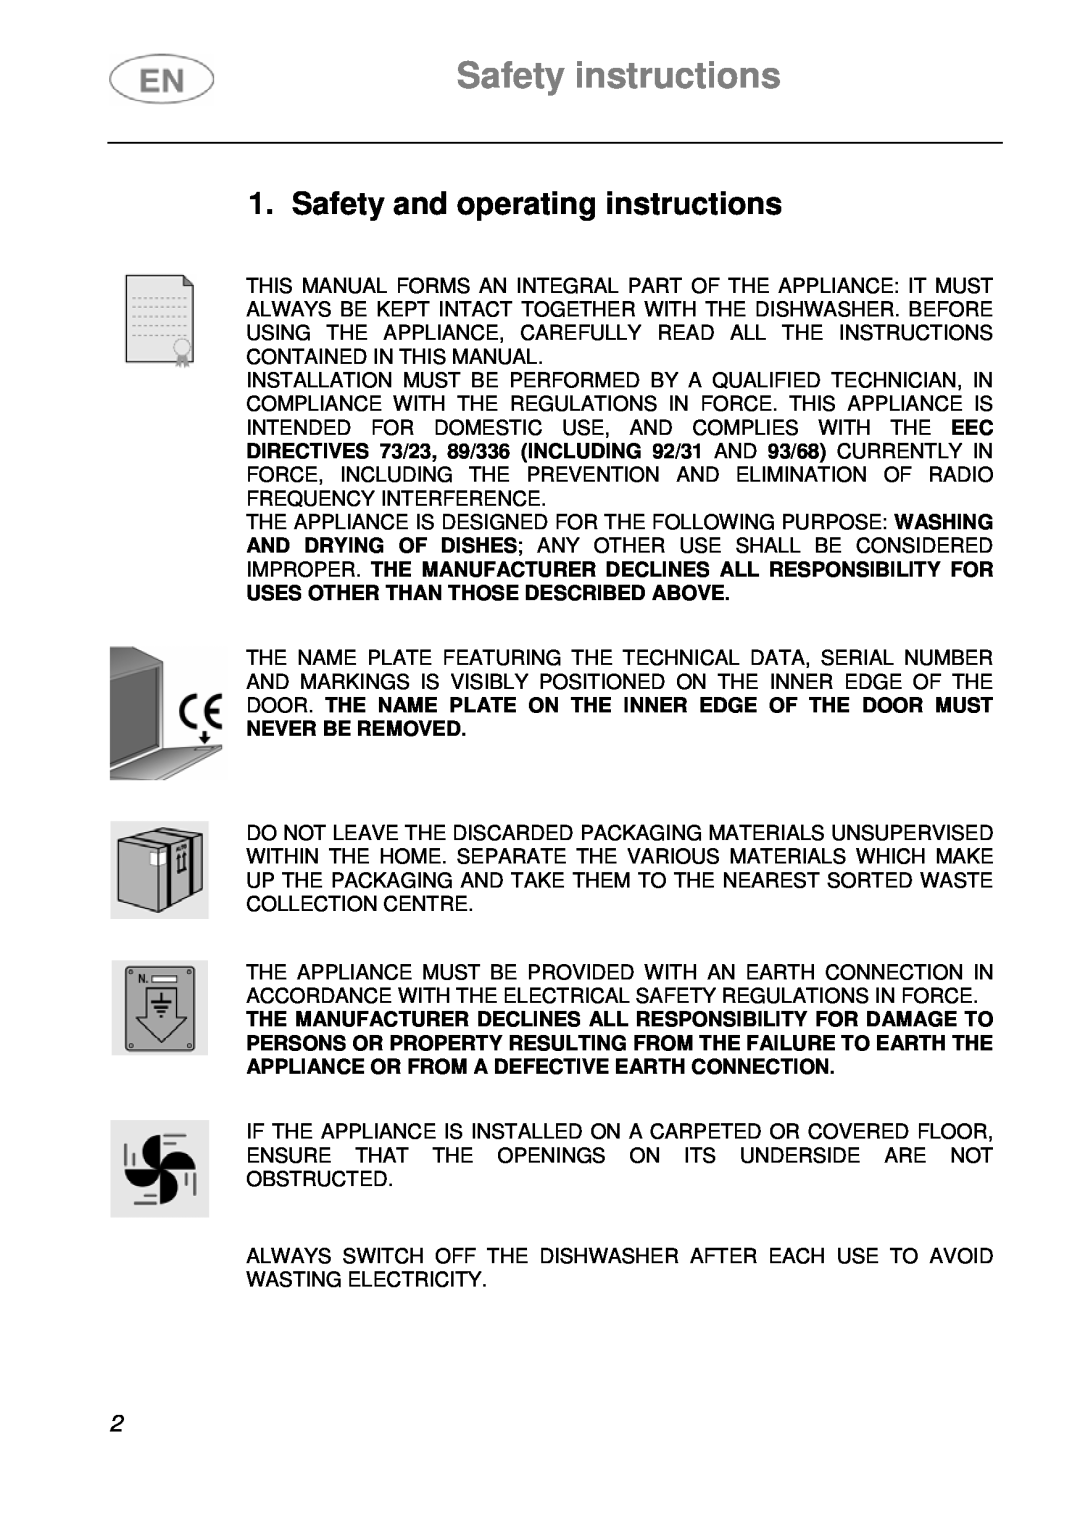 Smeg DFC612S, DFC612BK Safety instructions, Safety and operating instructions, Uses Other Than Those Described Above 